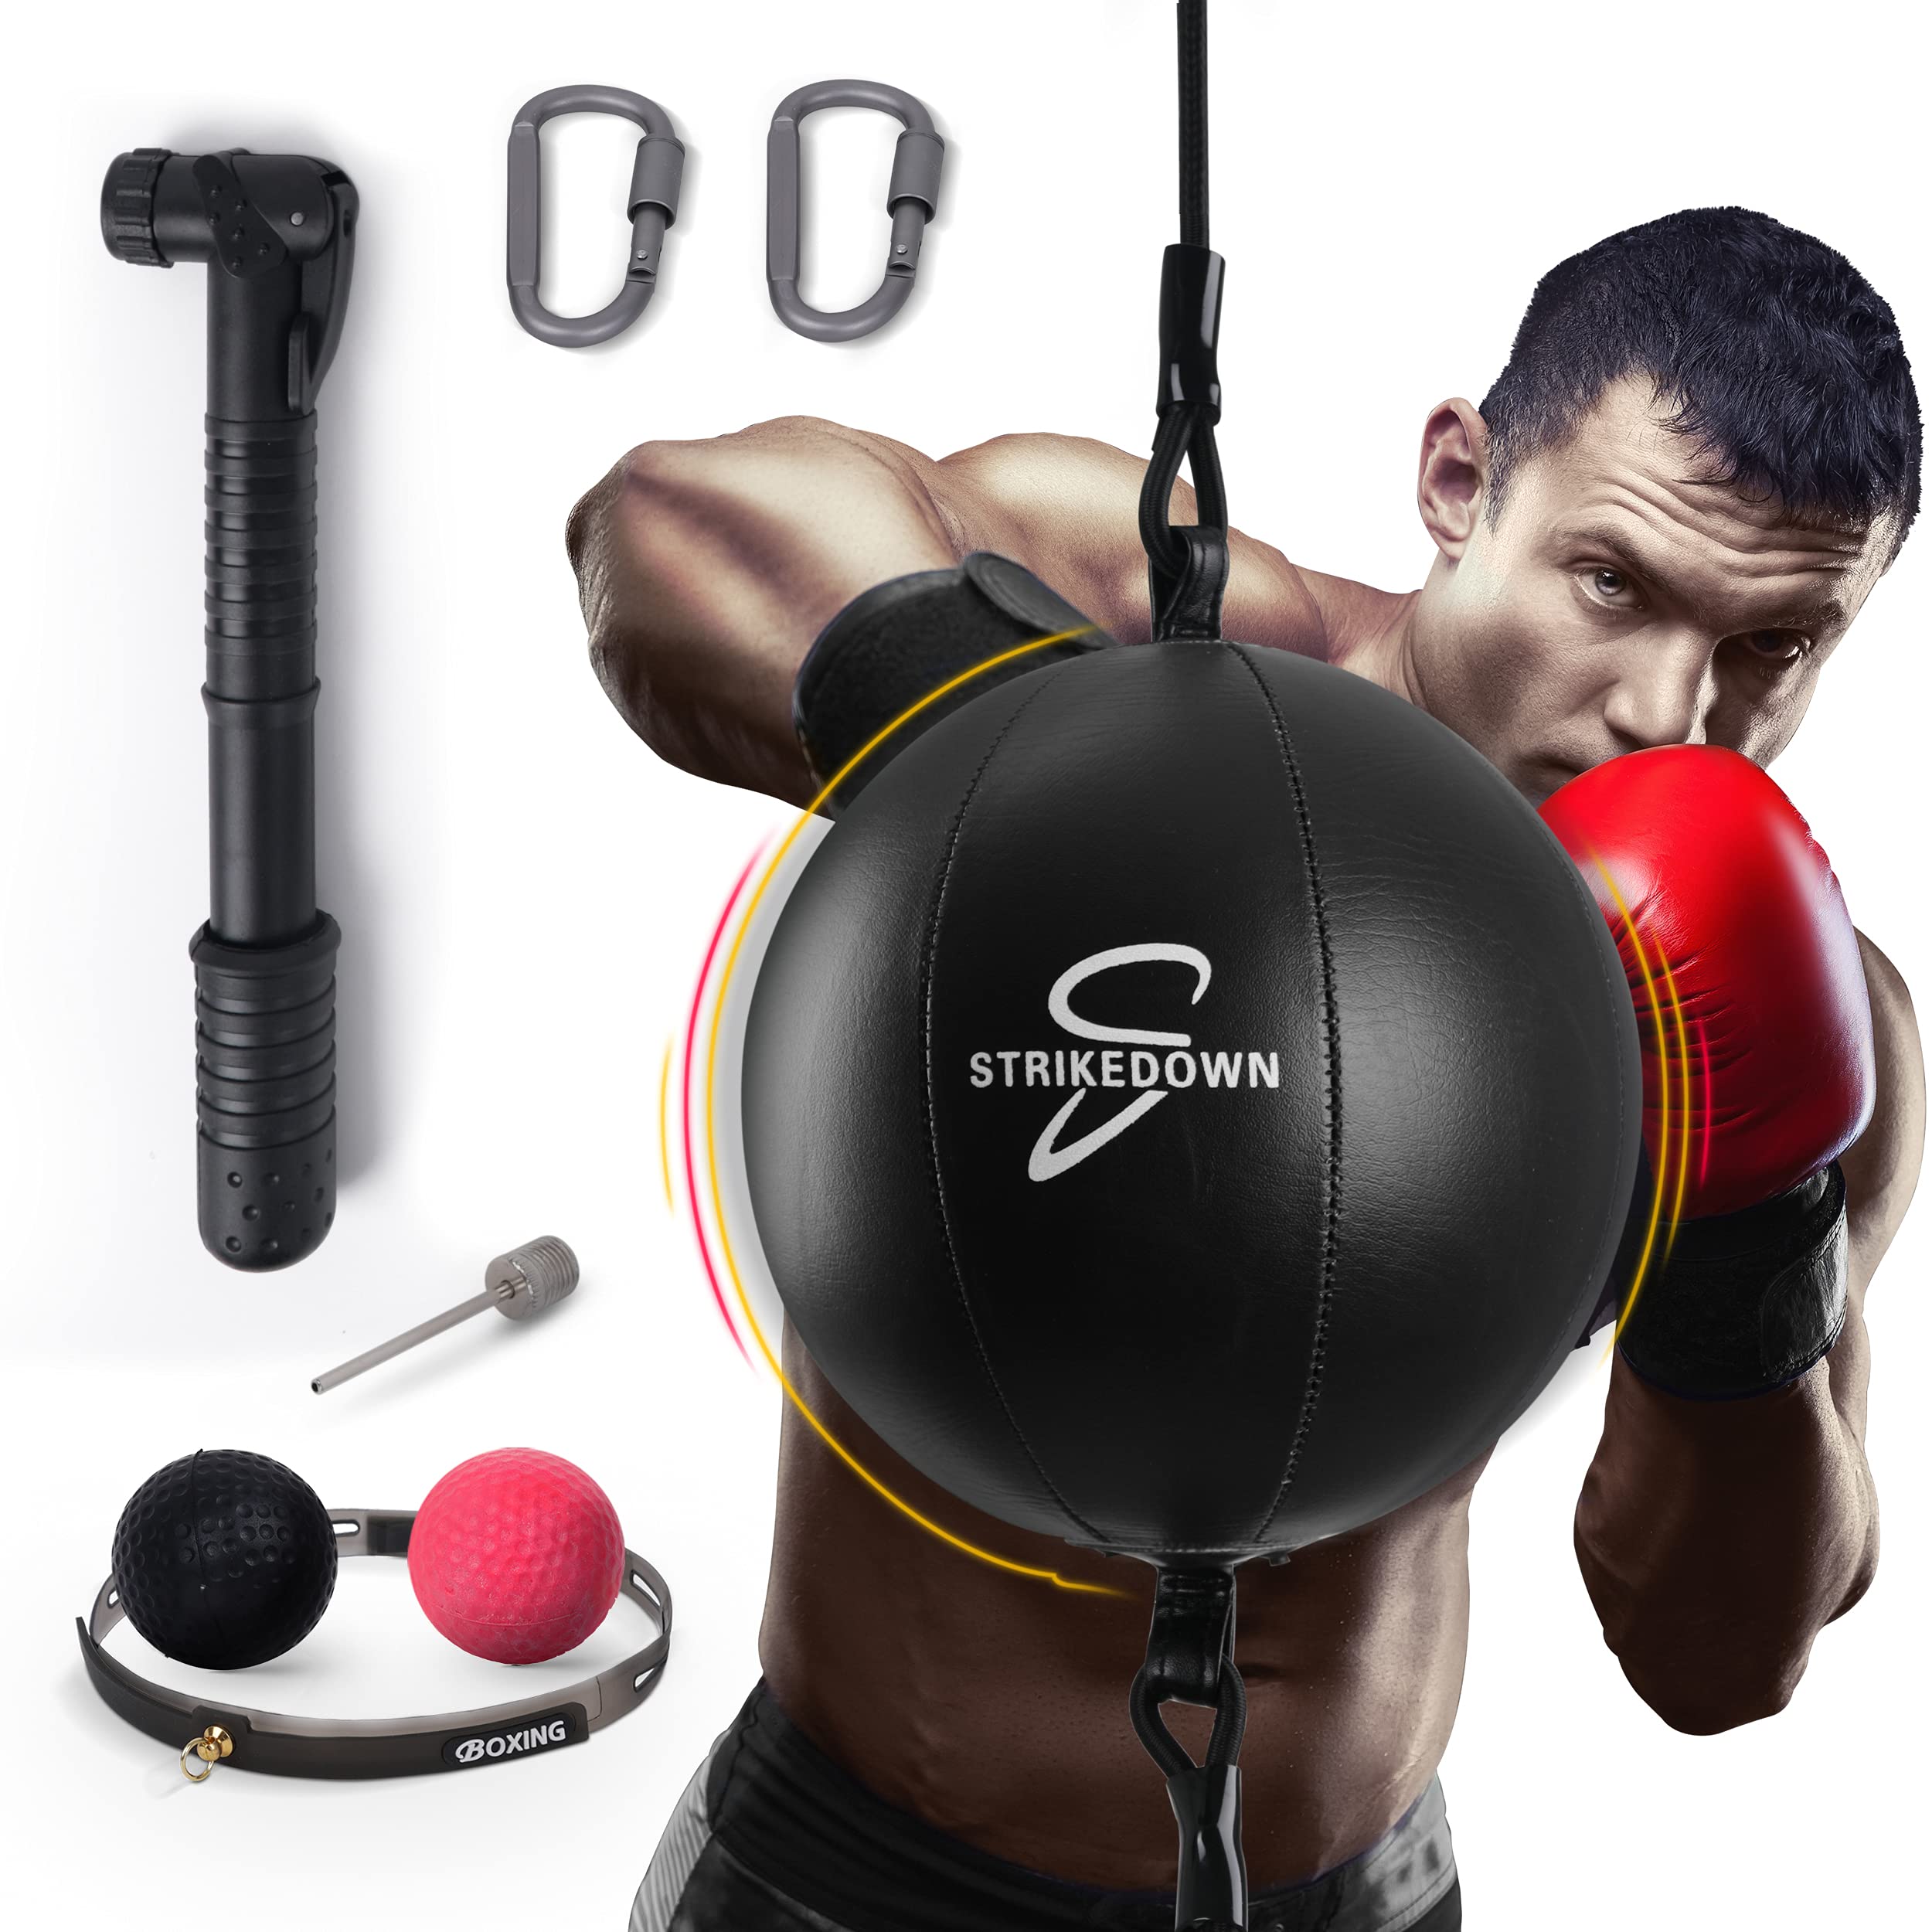 Kvittra Double End Punching Bag Boxing Striking for Training - Speed Ended  Set Includes Reflex Ball Headband and Pump- Portable MMA